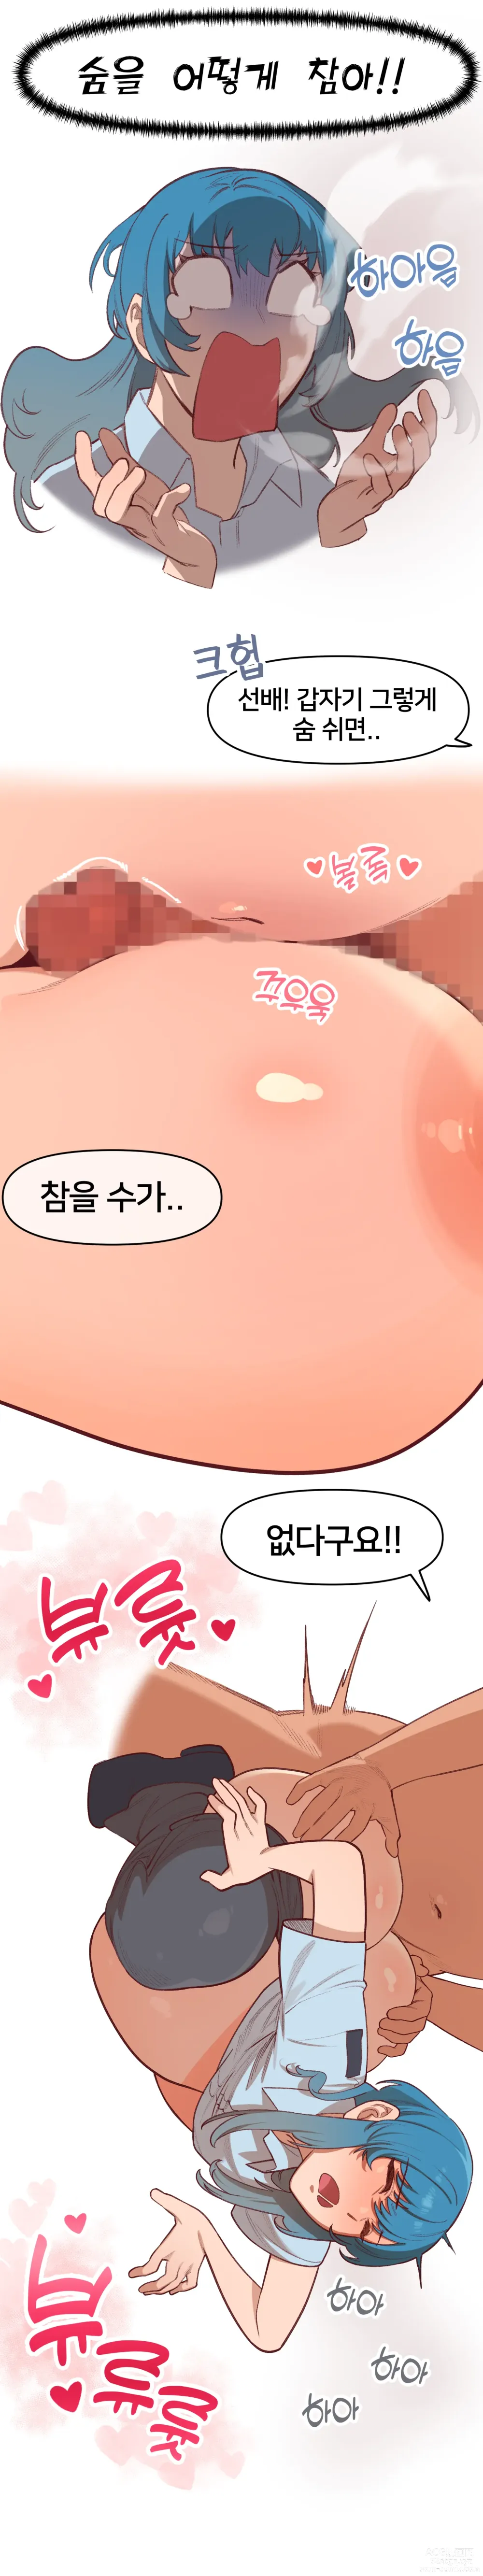 Page 7 of doujinshi 선배는 잠입수사형사